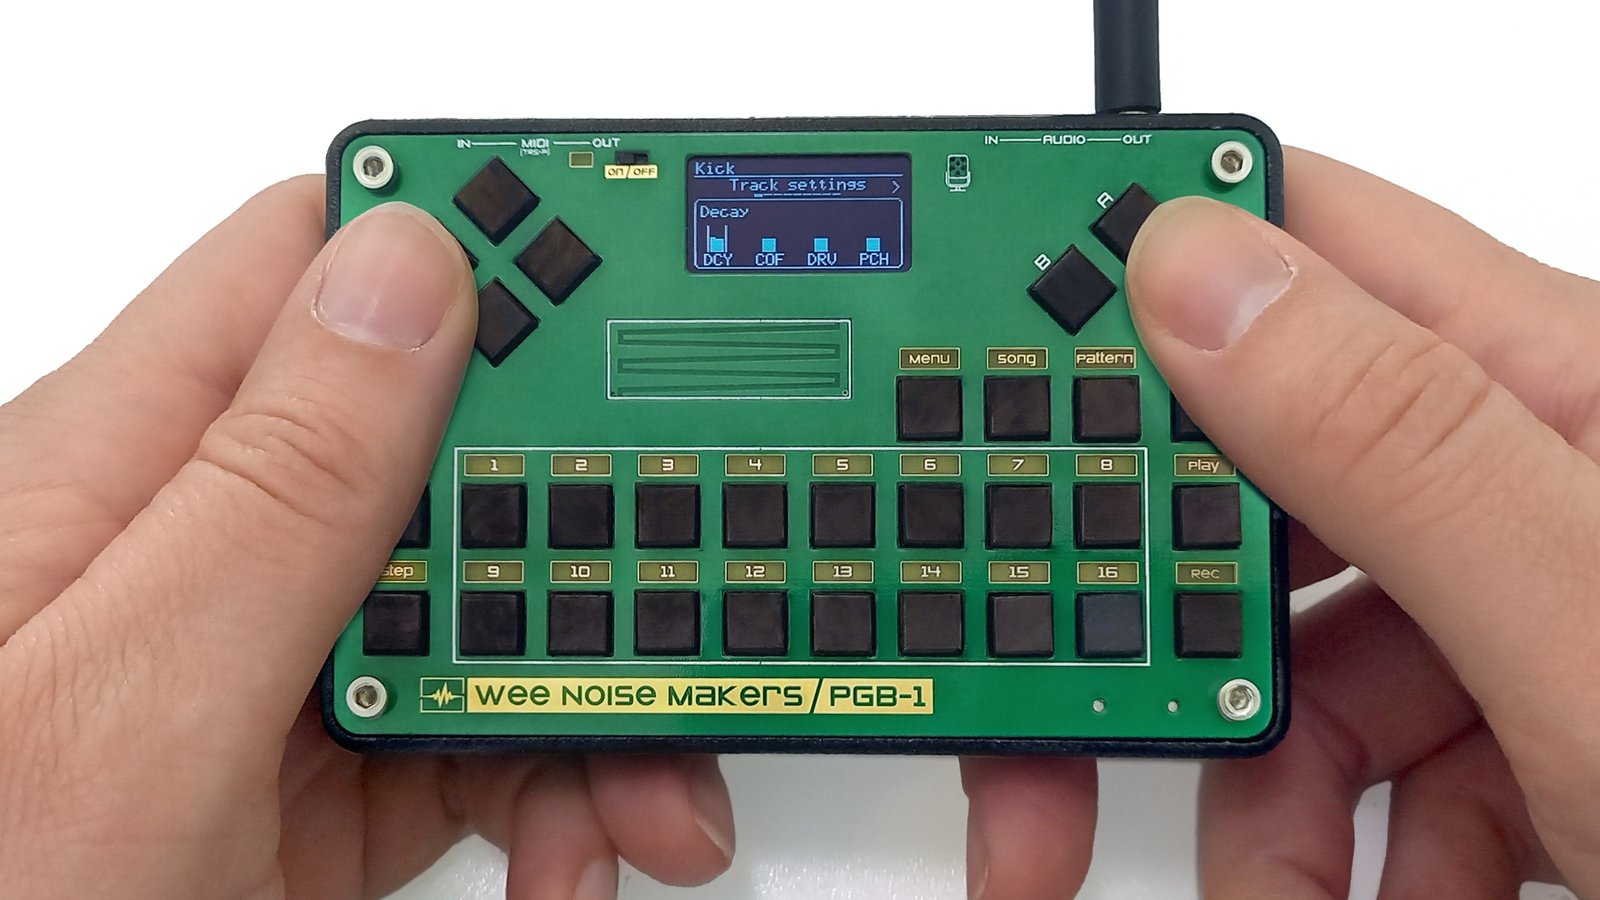 Wee Noise Makers PGB-1 Is an Open-Source Synthesizer, Sequencer, and Groove Box now on Crowd Supply